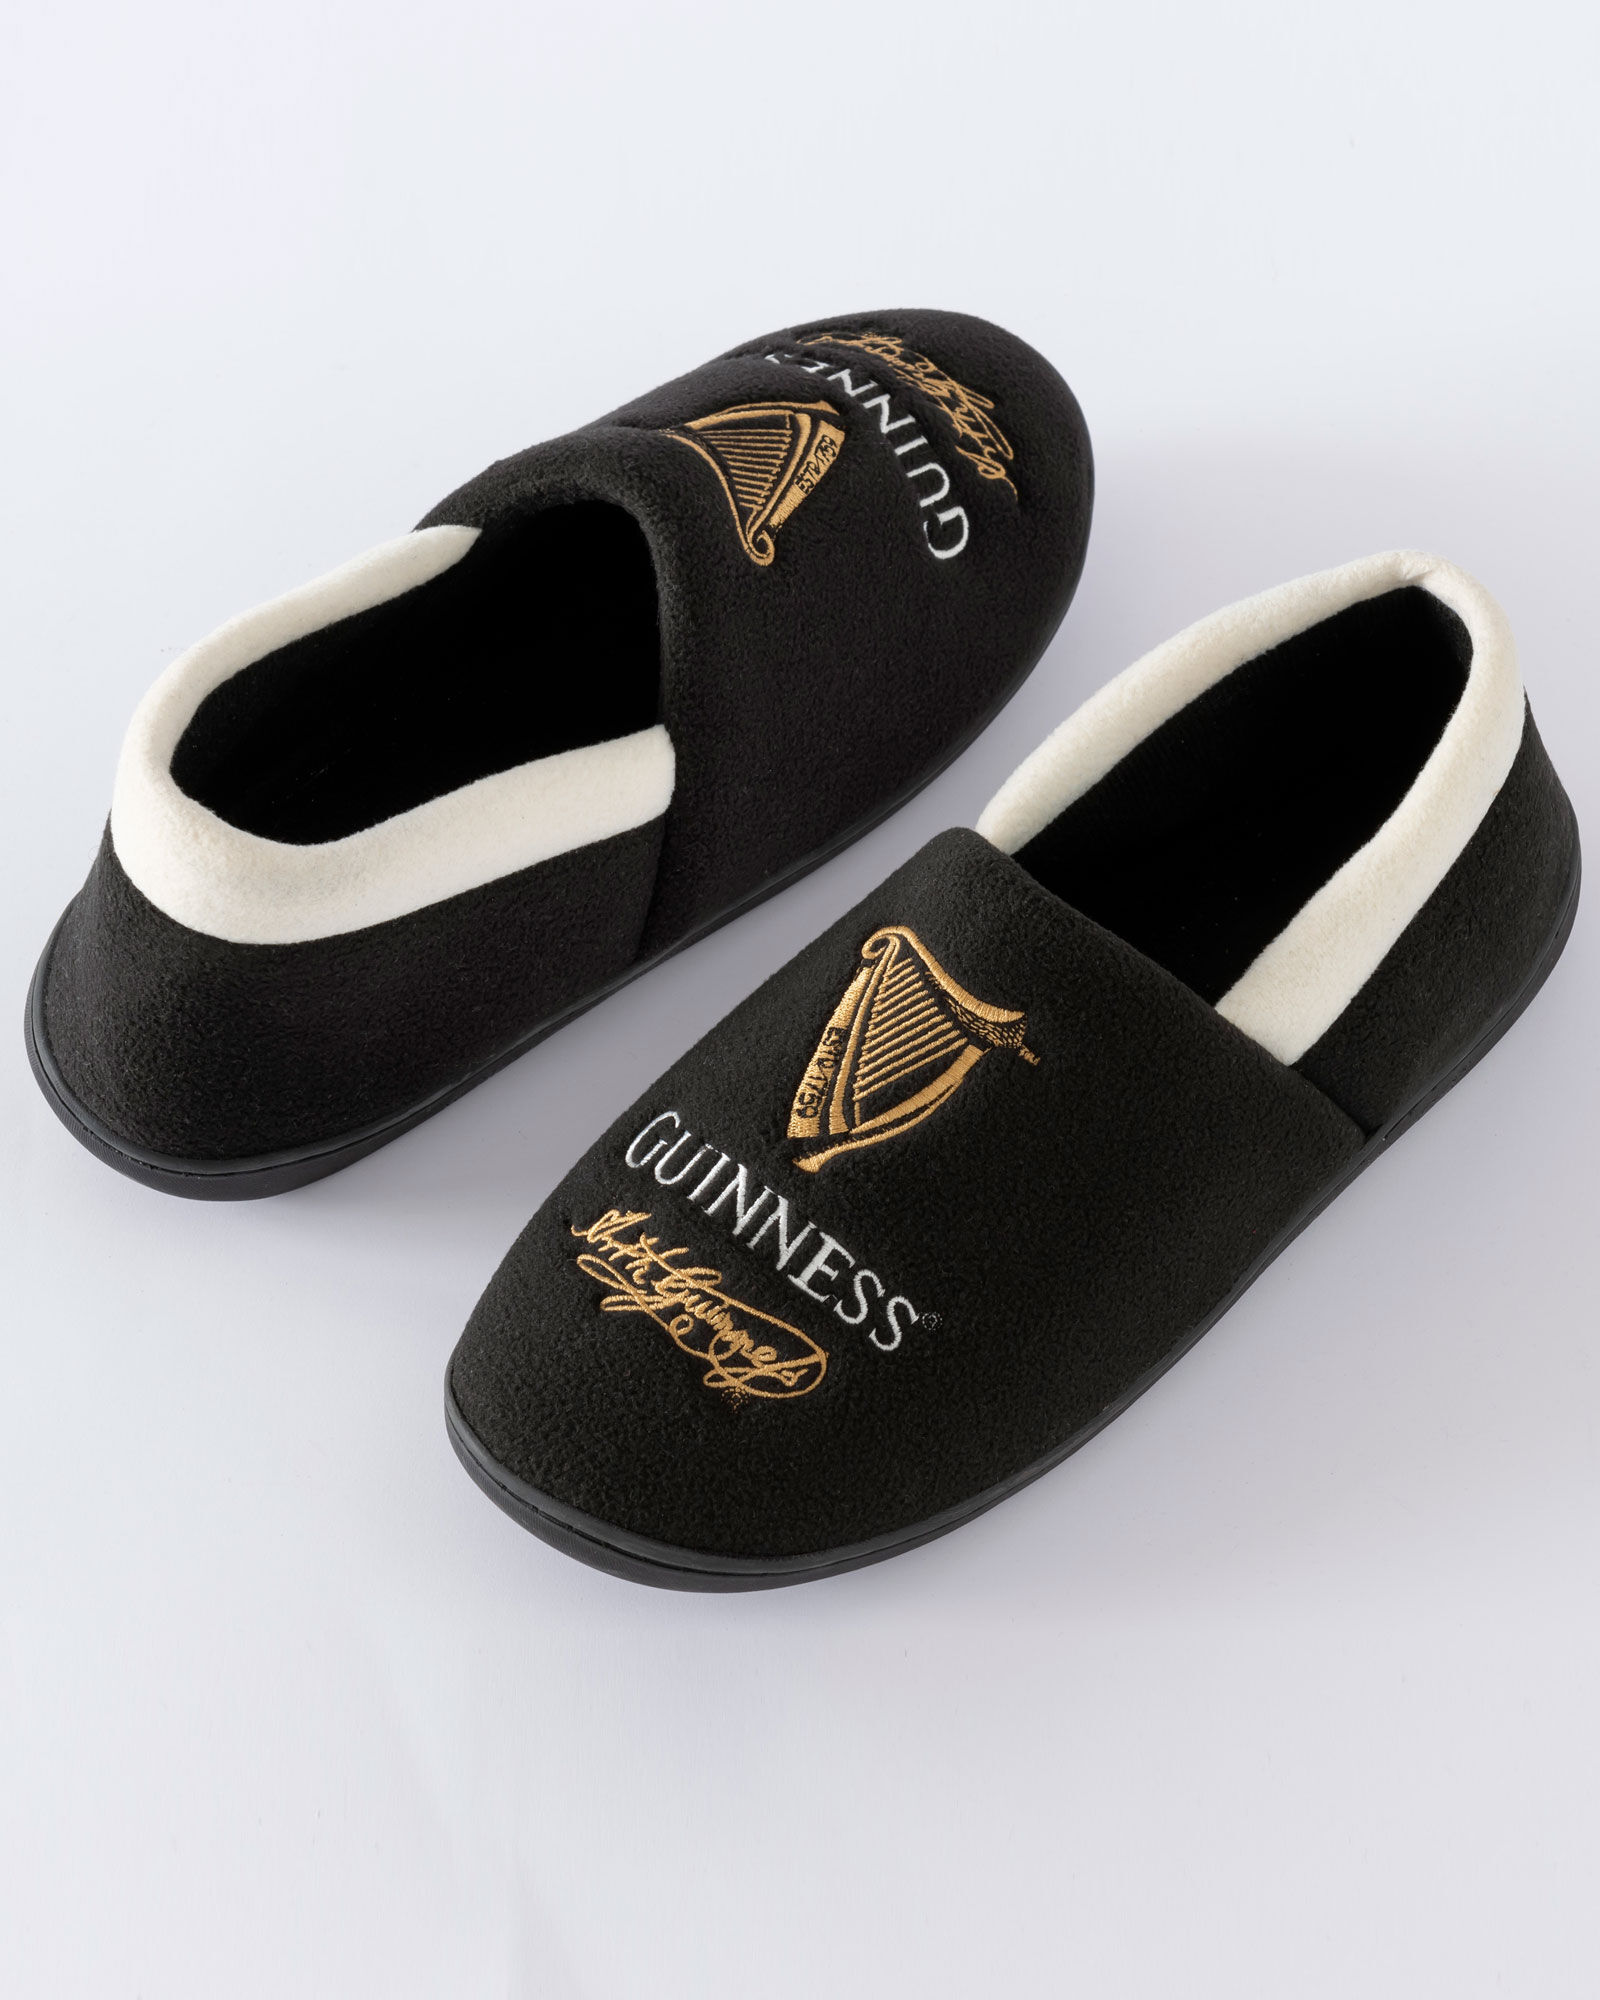 Guinness® Slippers at Cotton Traders